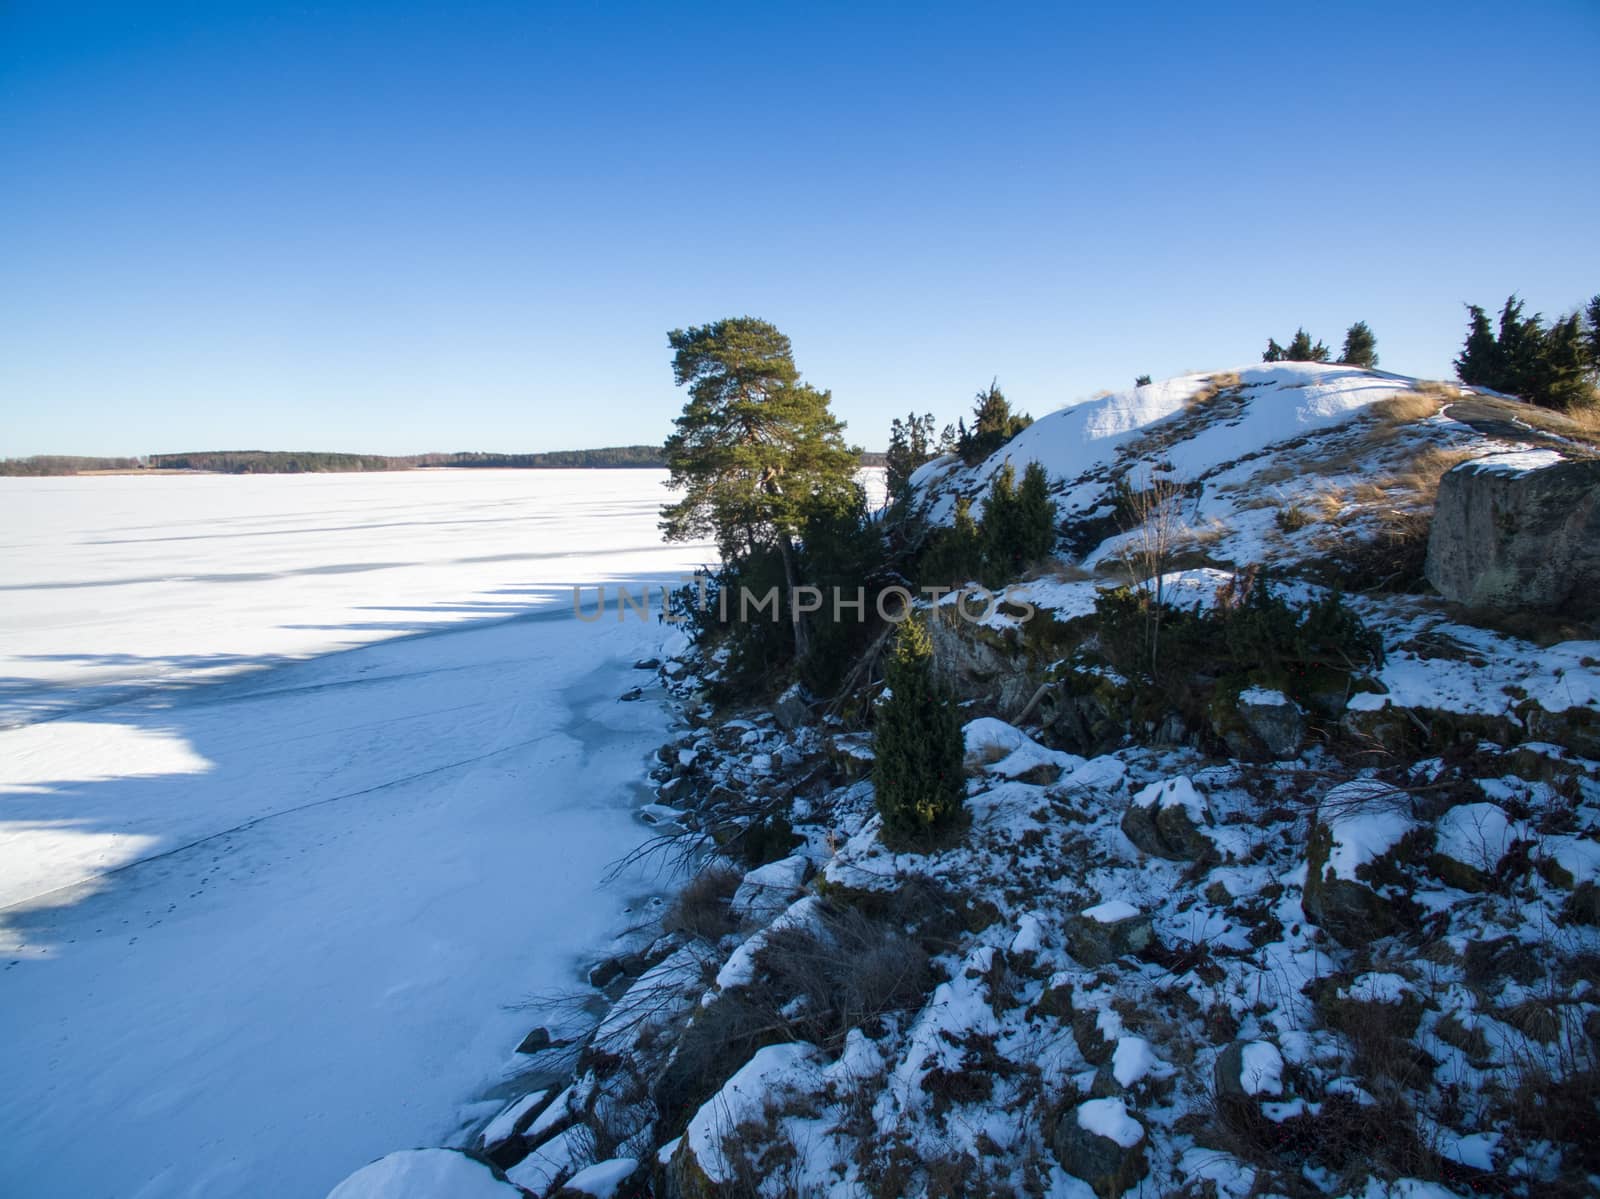 Long shadows on a frozen lake and rocky shore from the winter sun